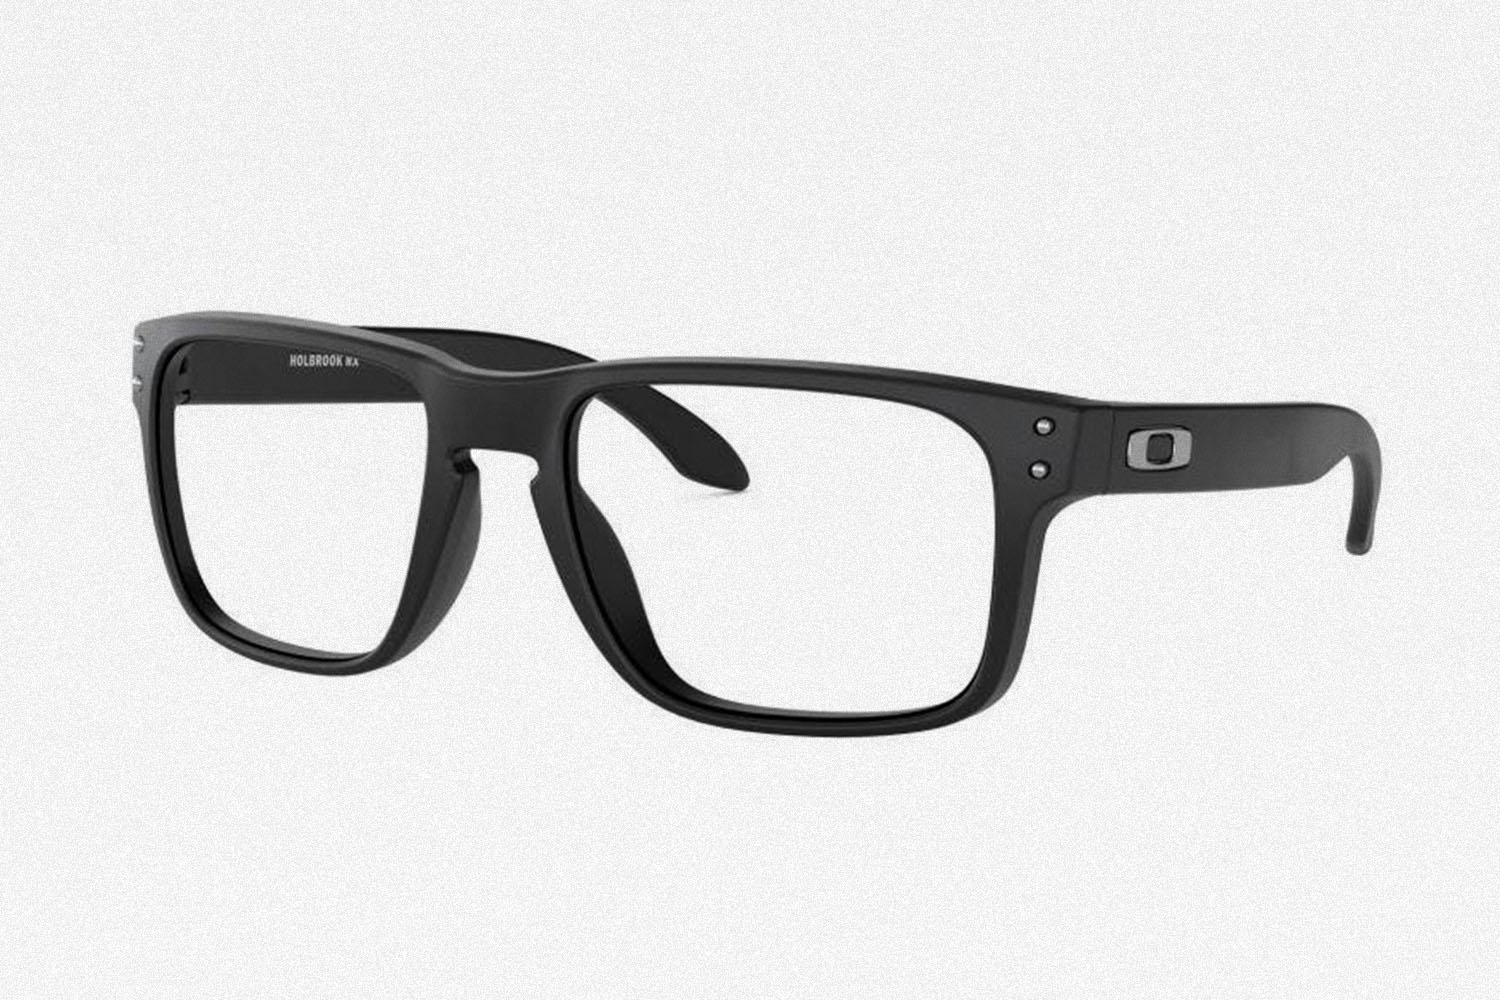 Need Glasses? Get To Know the Oakley Authentic Prescription Program ...